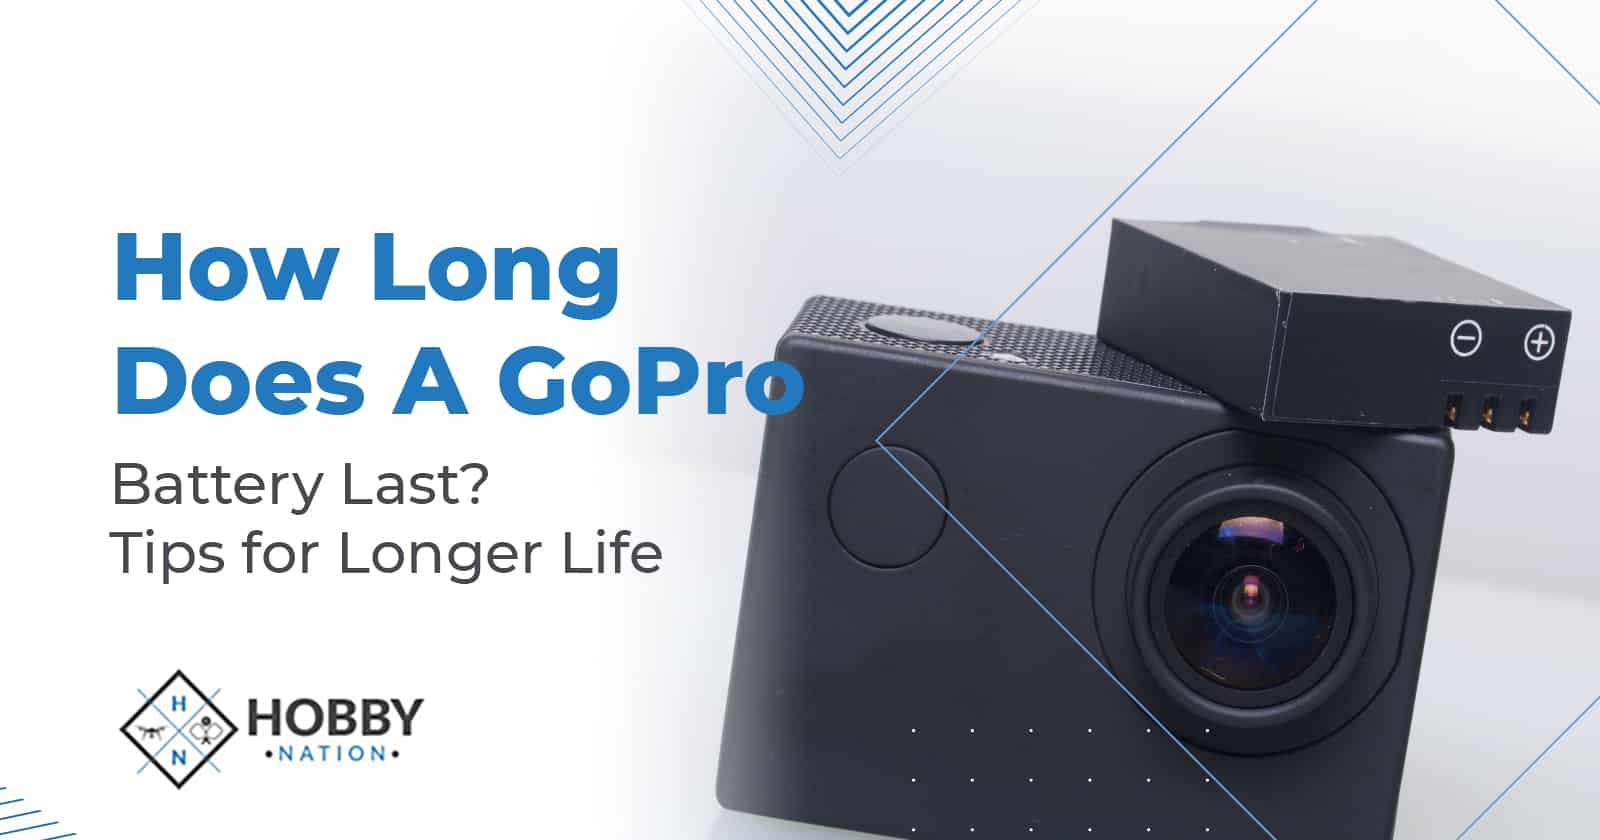 How Long Does a GoPro Battery Last? Tips for Longer Life